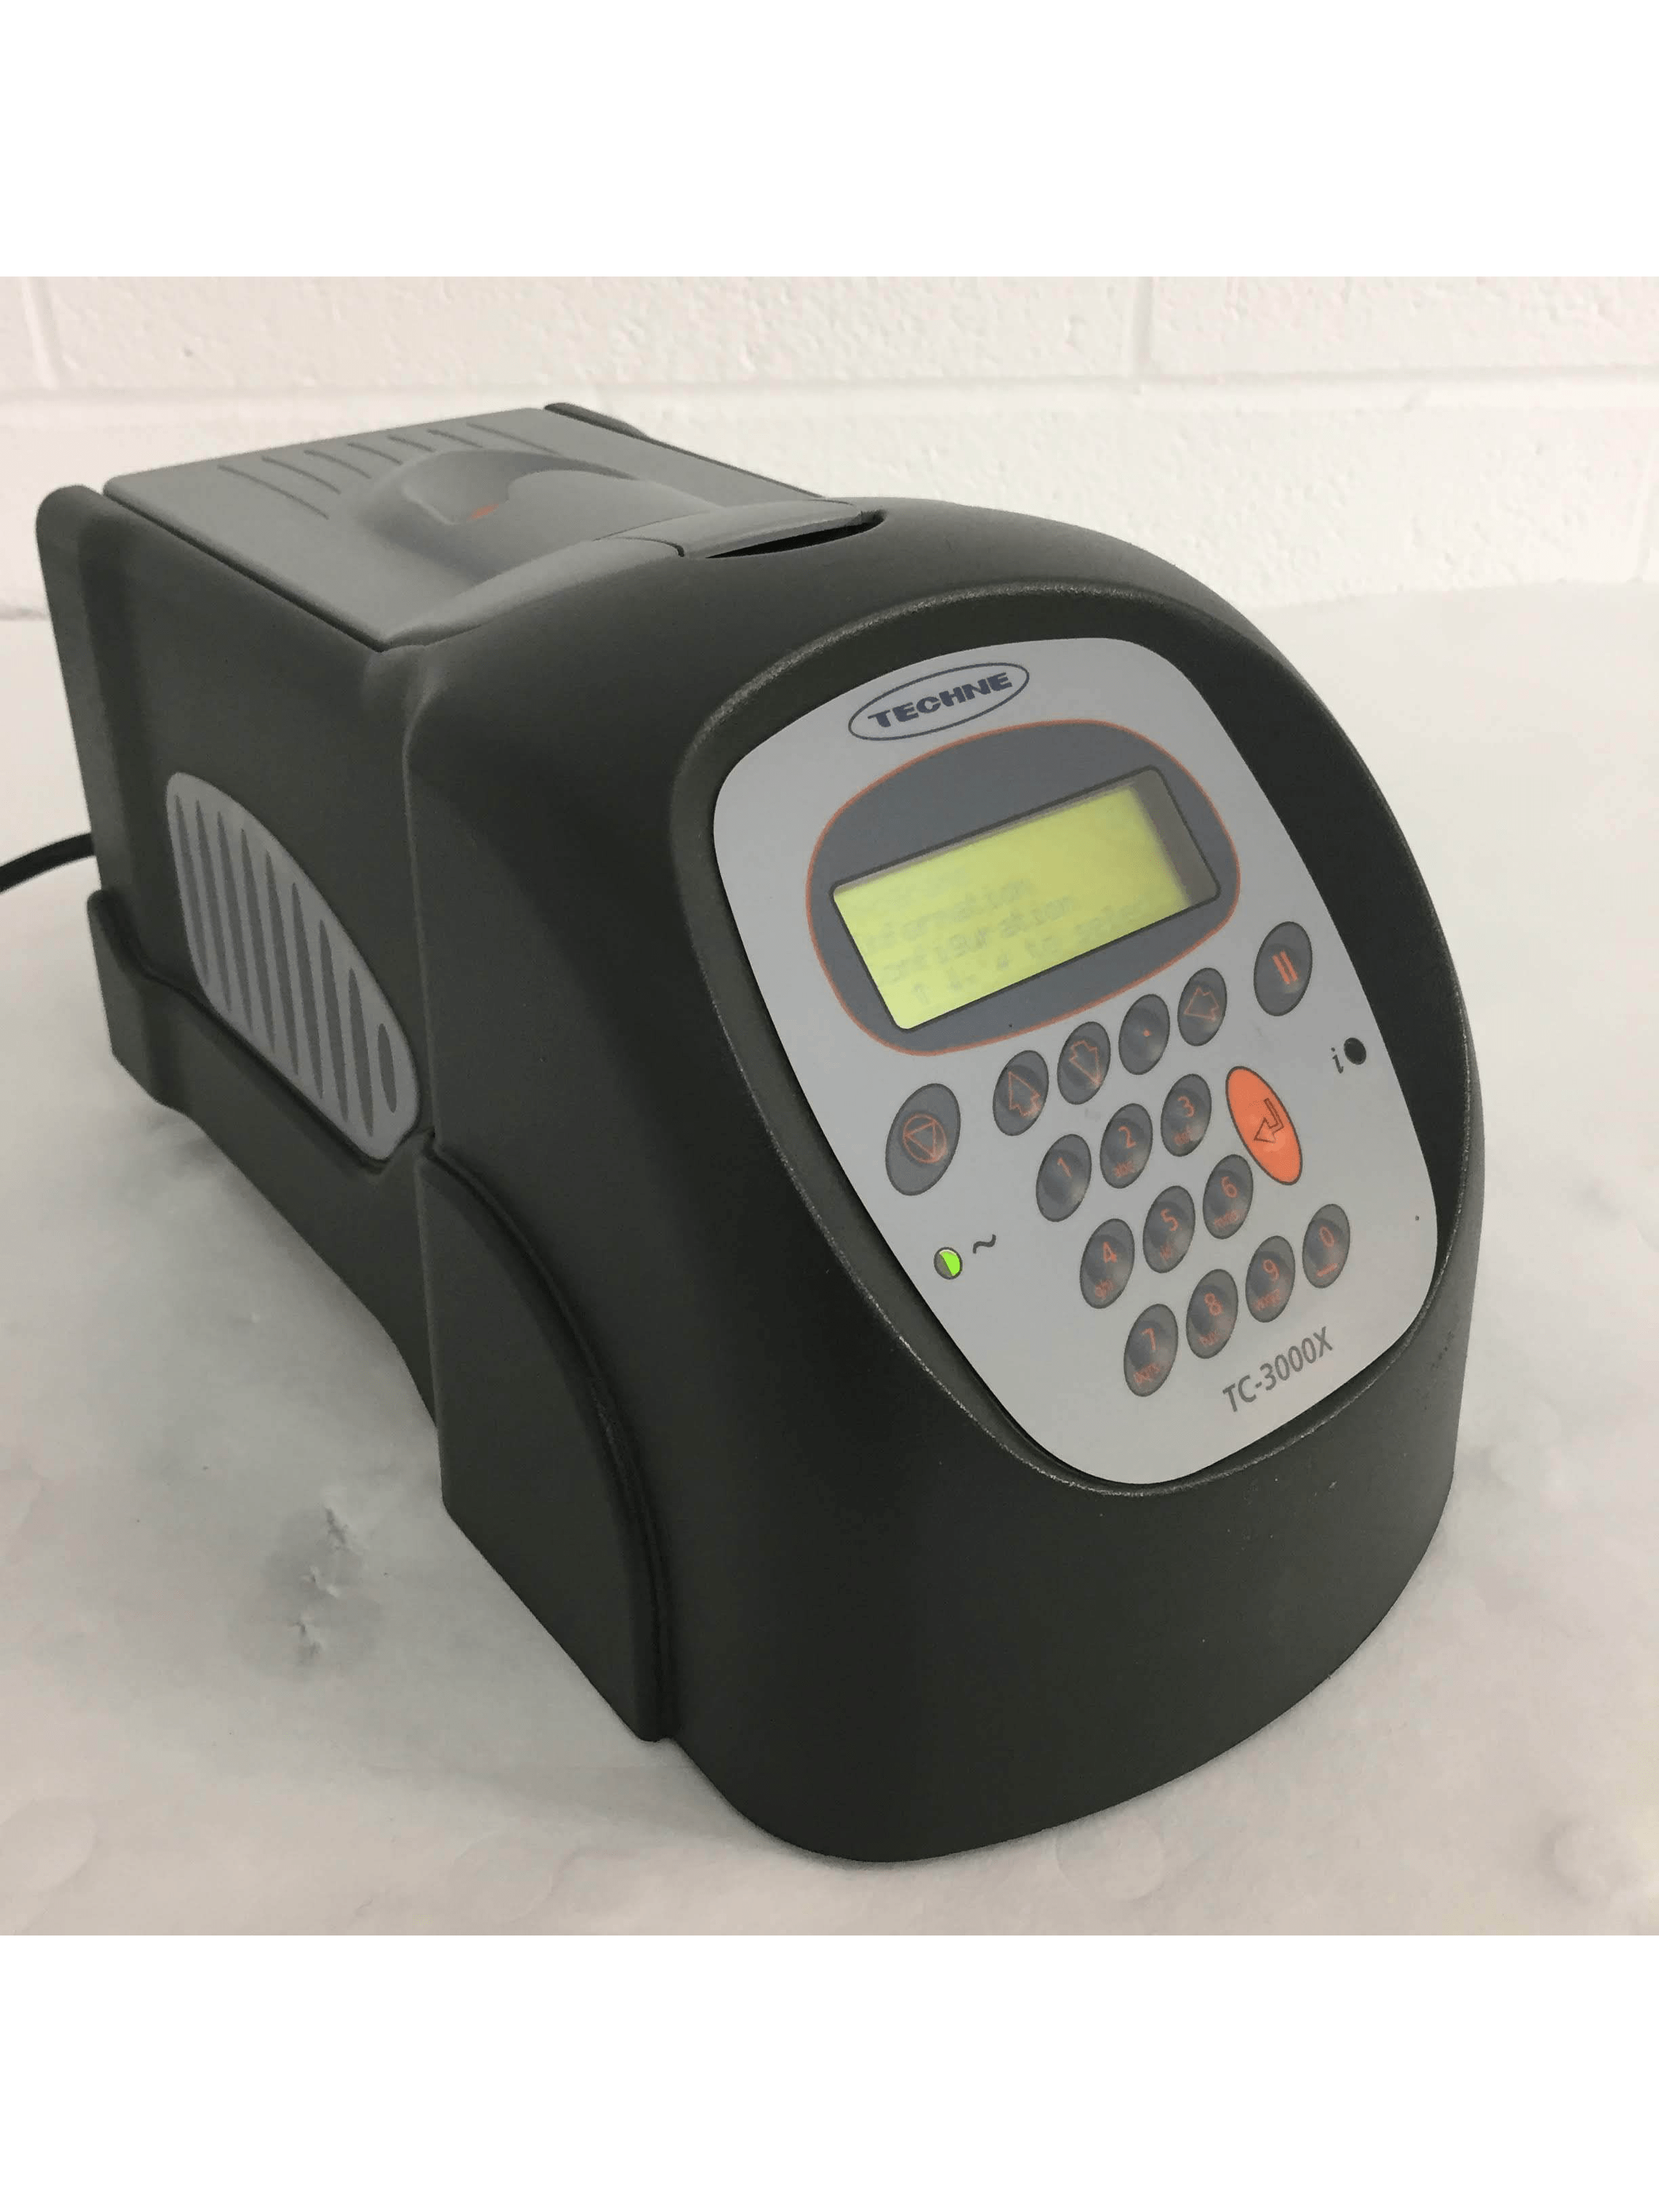 techne tc3000x thermocycler